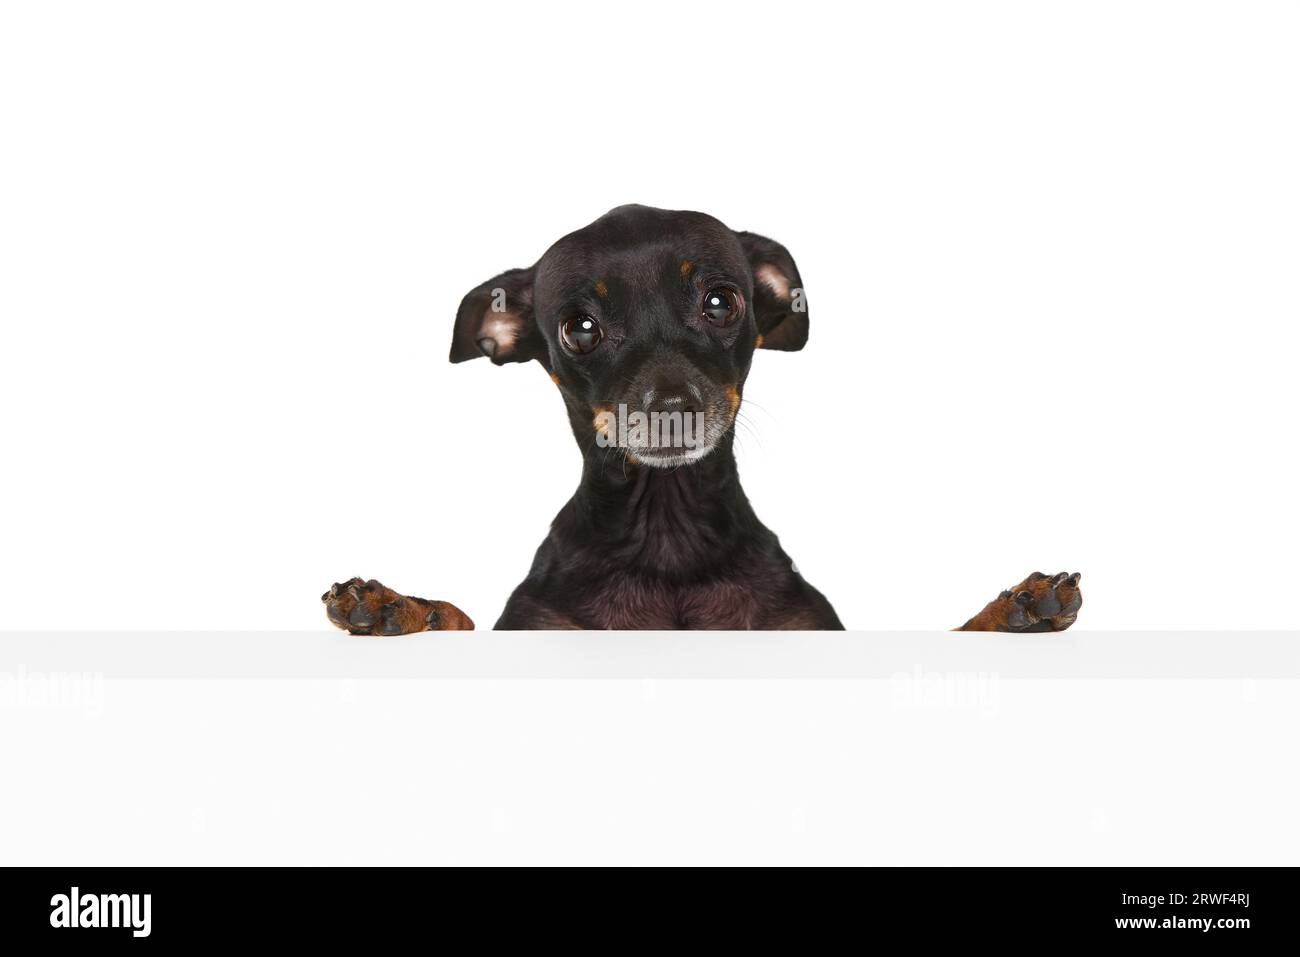 Sad puppy dog eyes. Portrait with one dog, pet Prague ratter looking cute, pitifully isolated over white background. Stock Photo